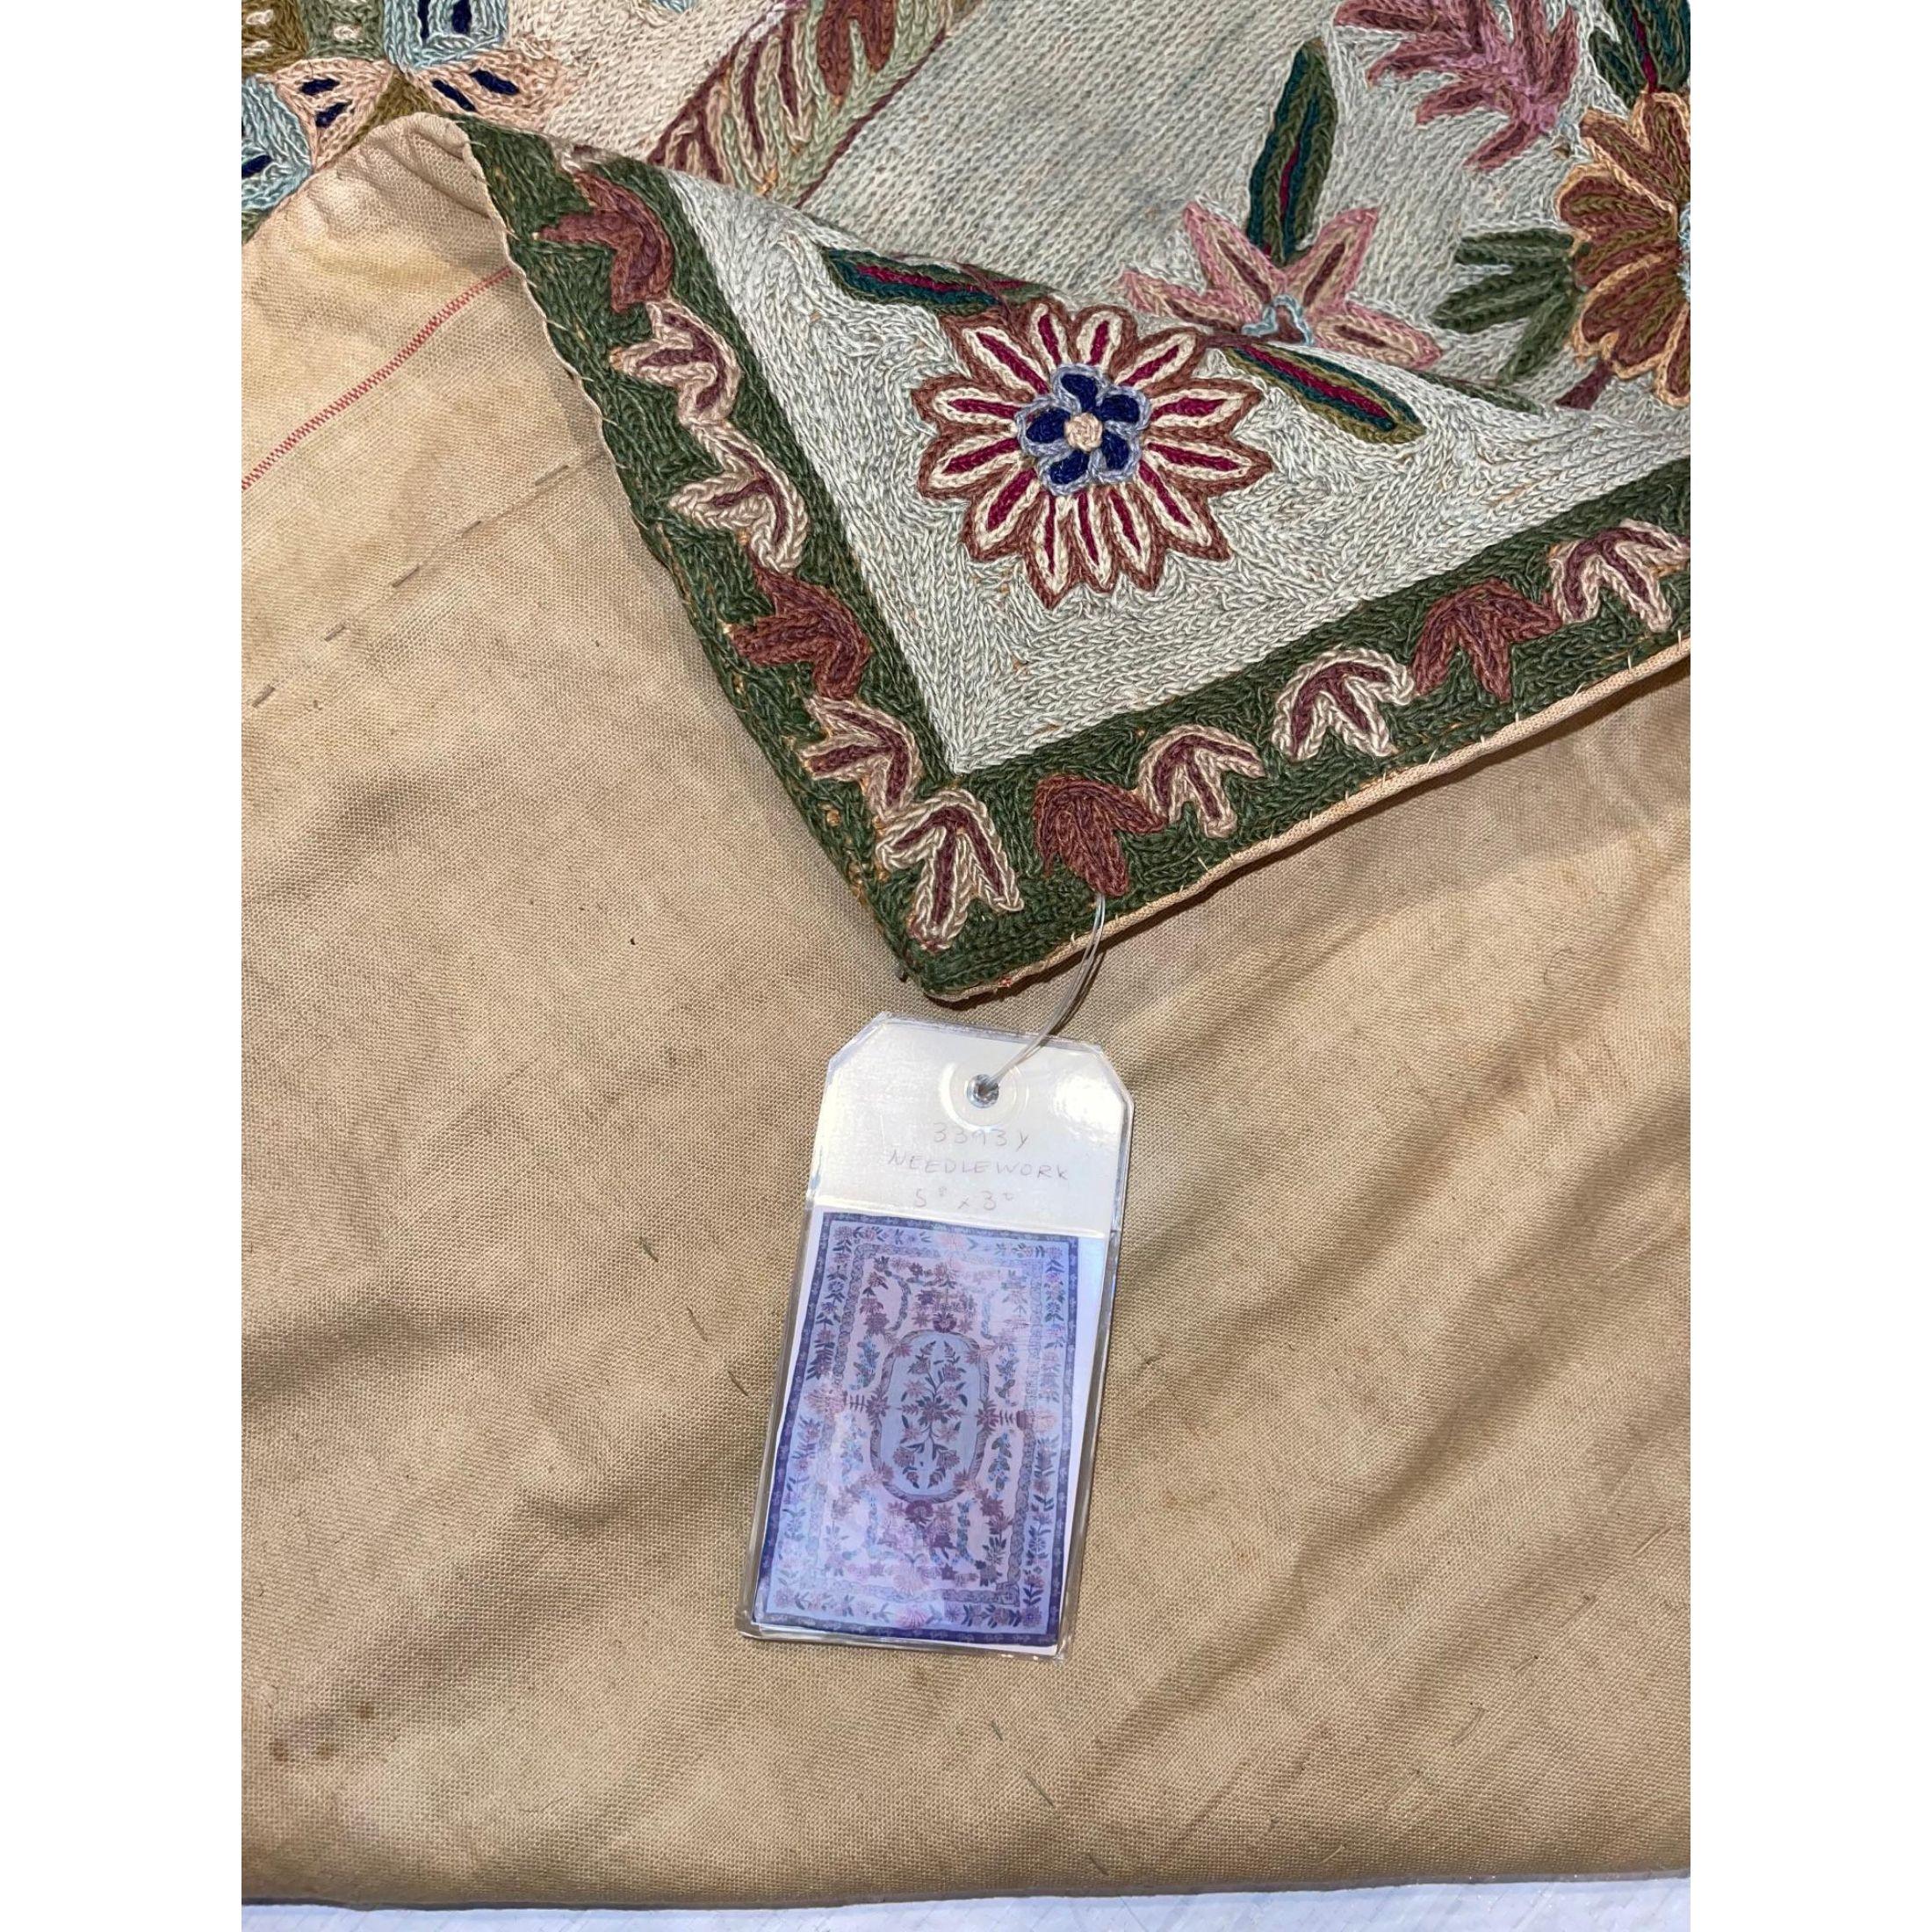 Antique Needlework Floral Design In Good Condition For Sale In Los Angeles, US